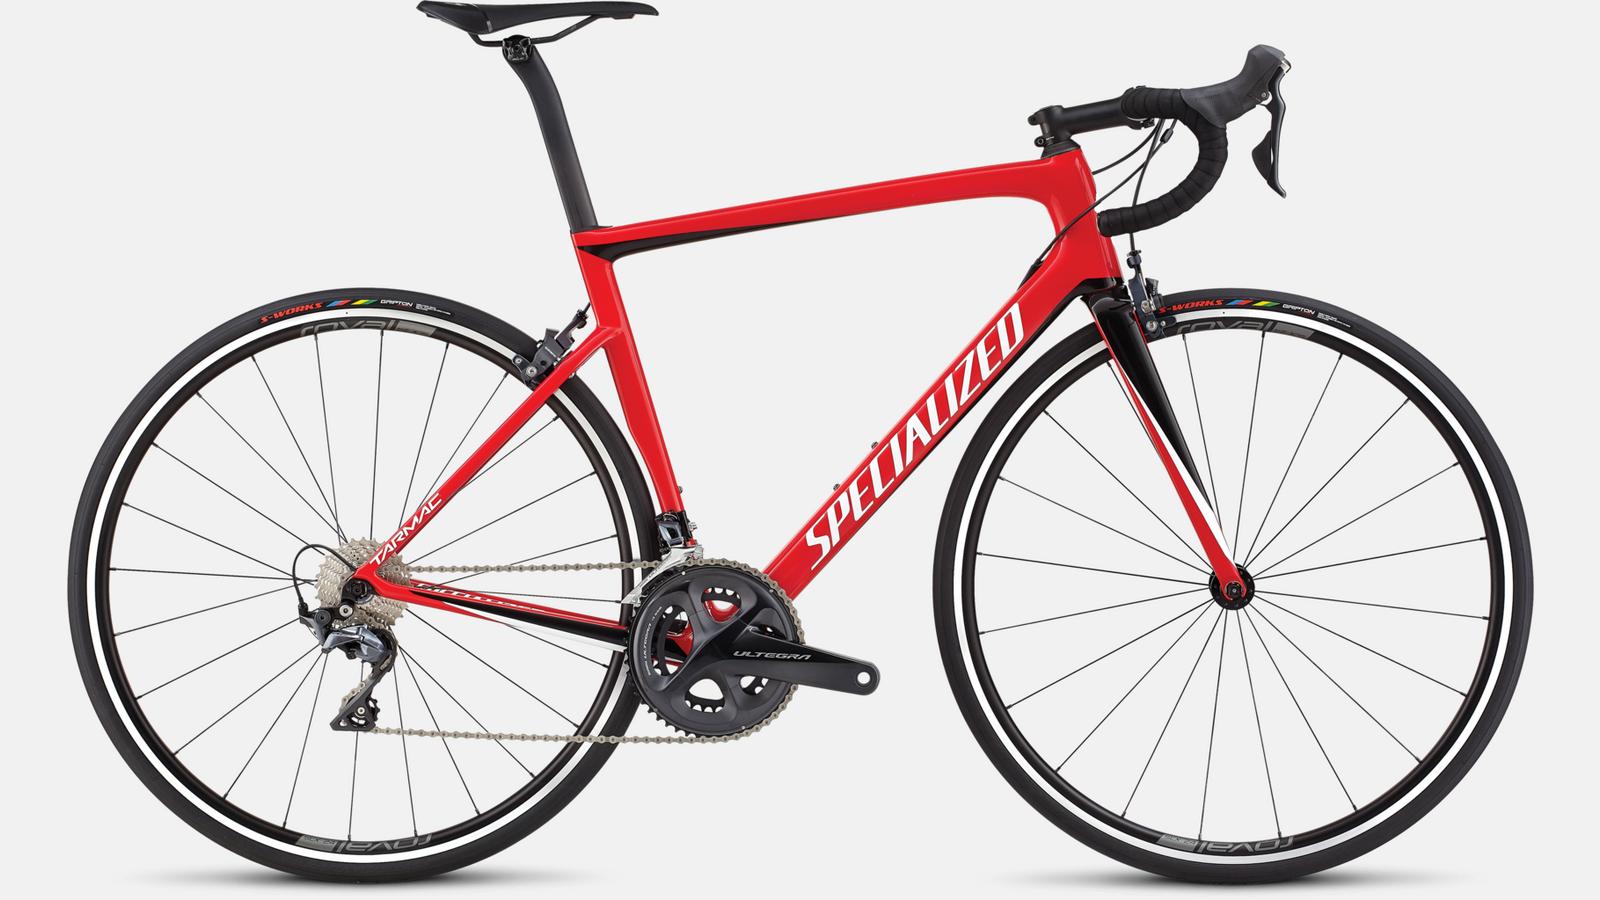 Paint for 2018 Specialized Men's Tarmac Expert - Gloss Flo Red